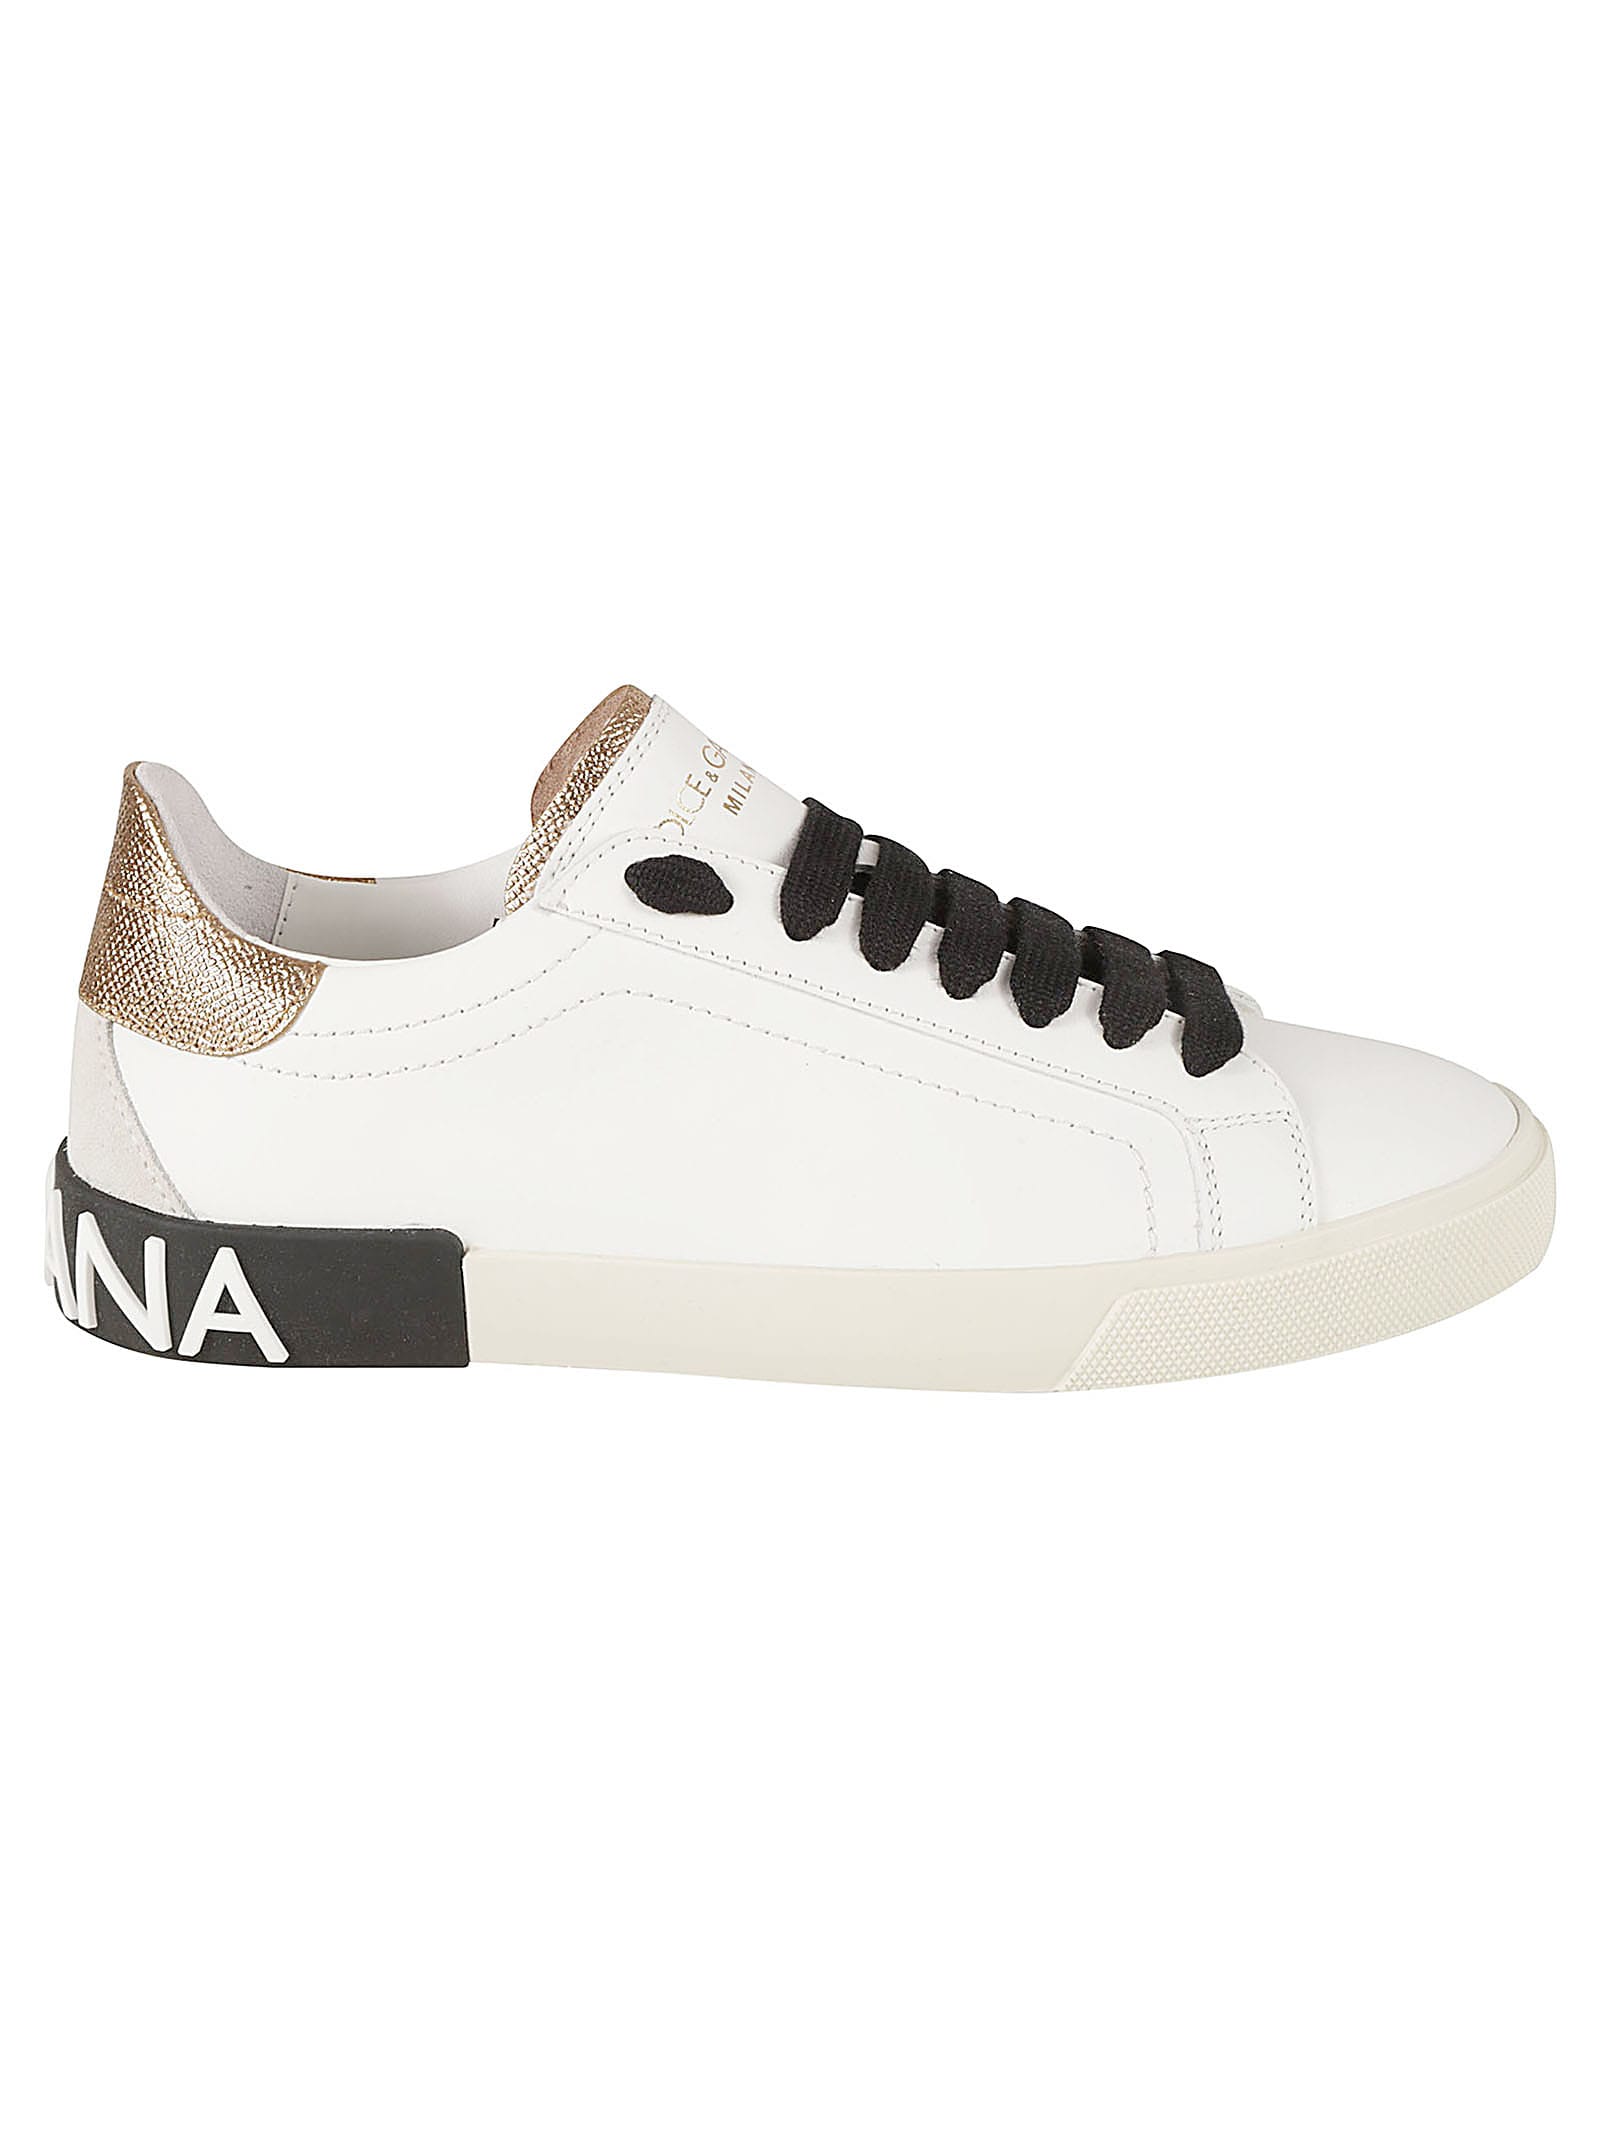 Dolce & Gabbana Logo Embossed Vintage Sneakers In White/gold